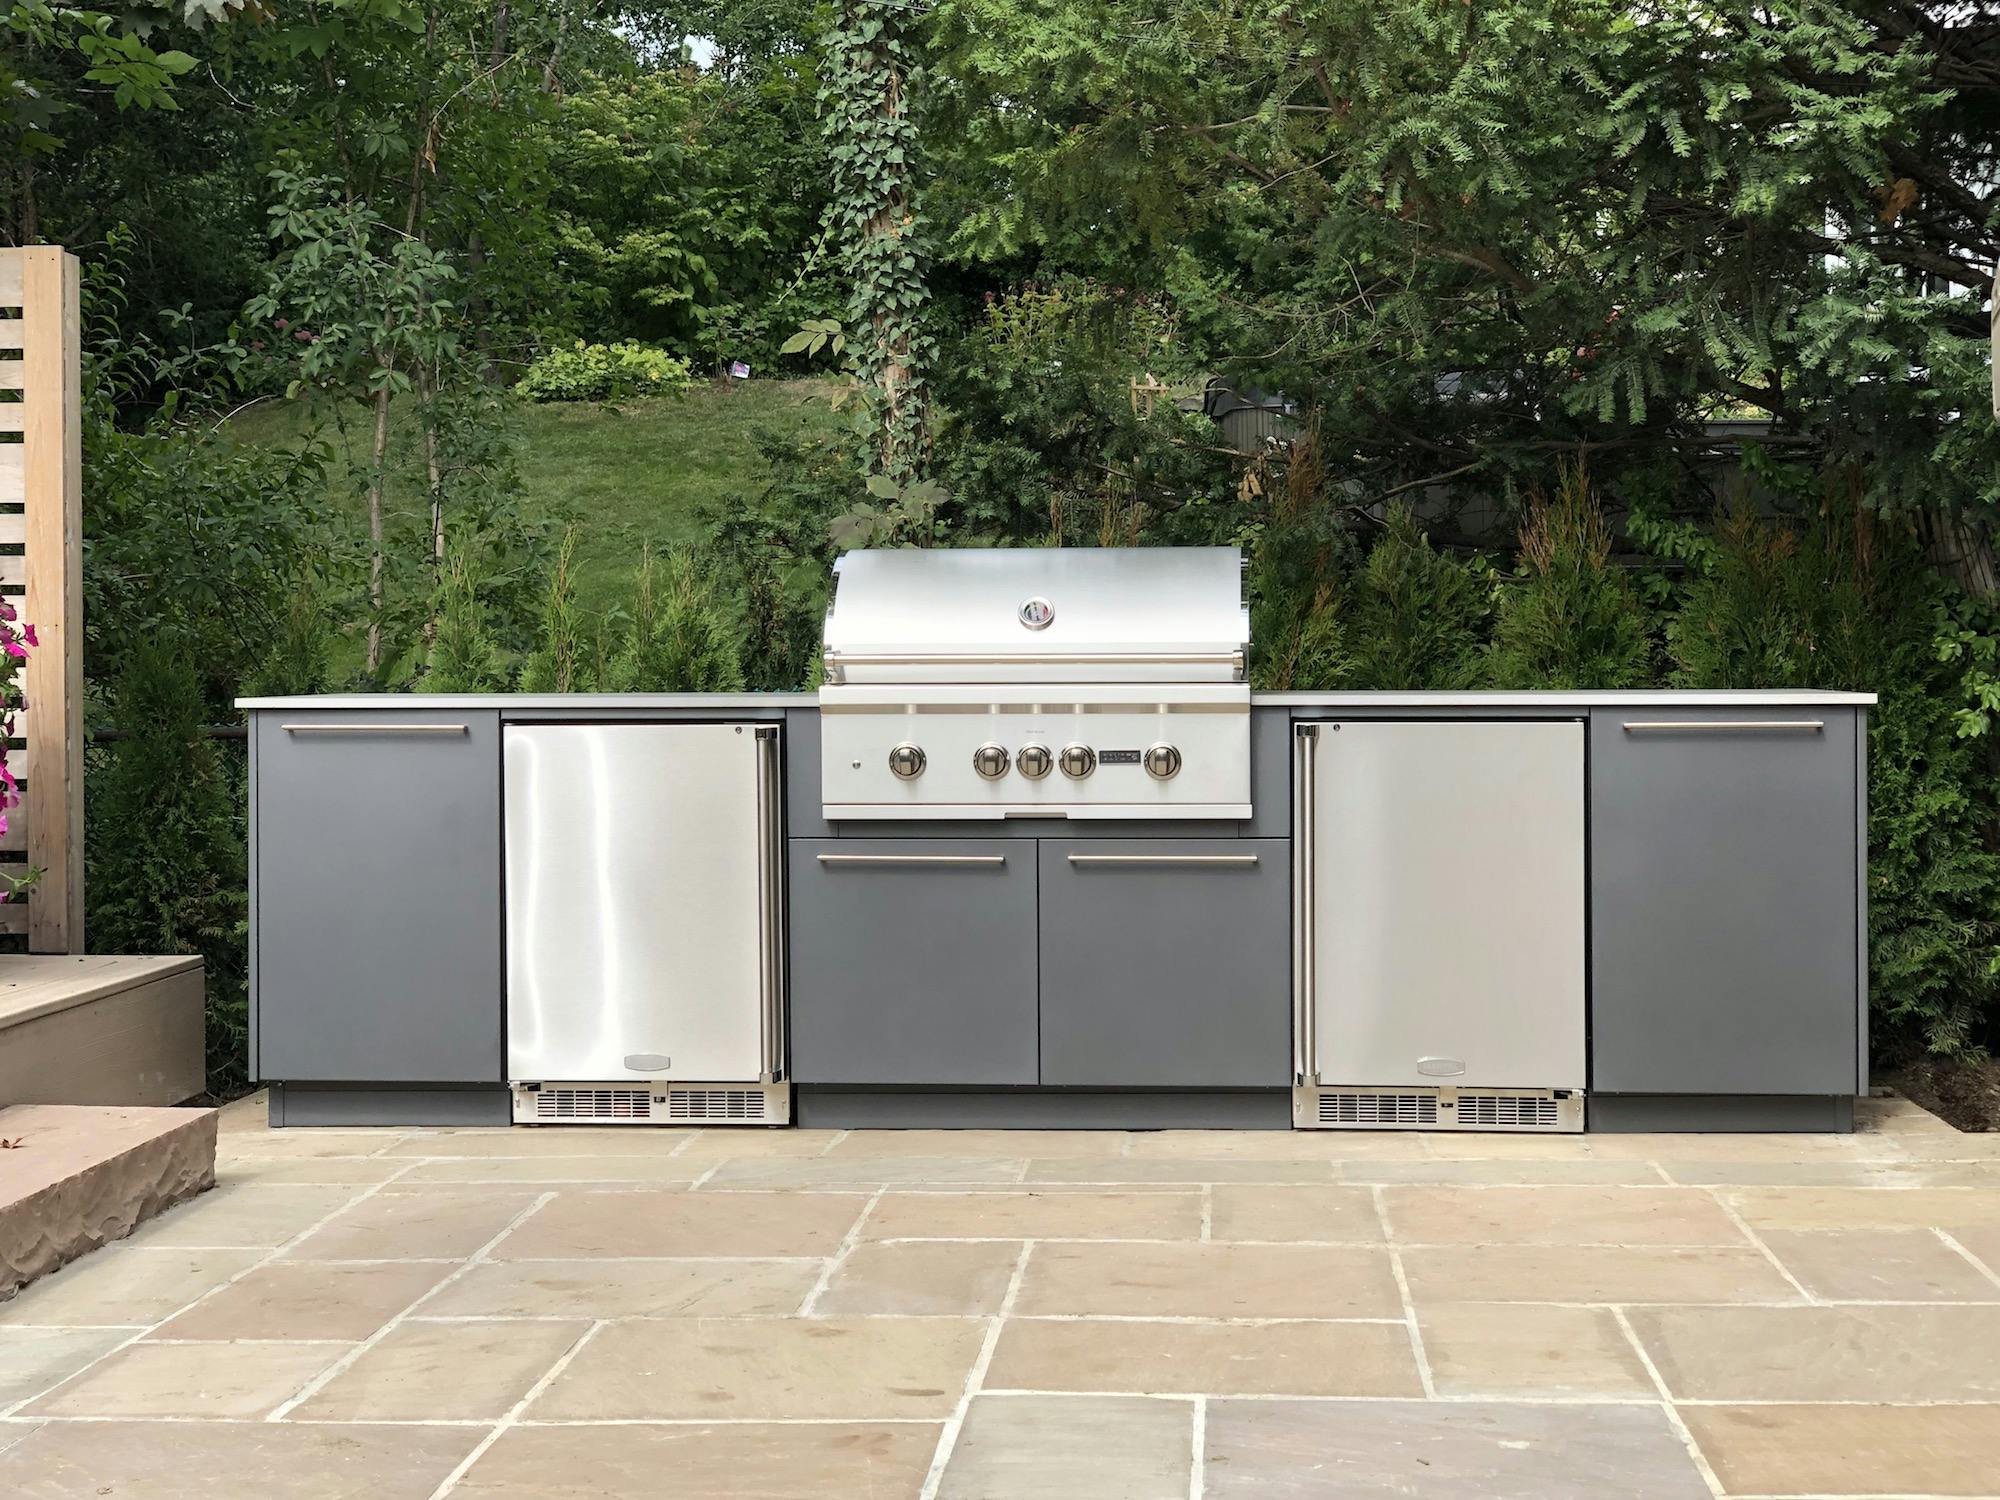 Great Canadian Backyard Series: Urban Bonfire X Outdoor Kitchen & Cabinetry deliver a special outdoor living area for a Toronto family of four